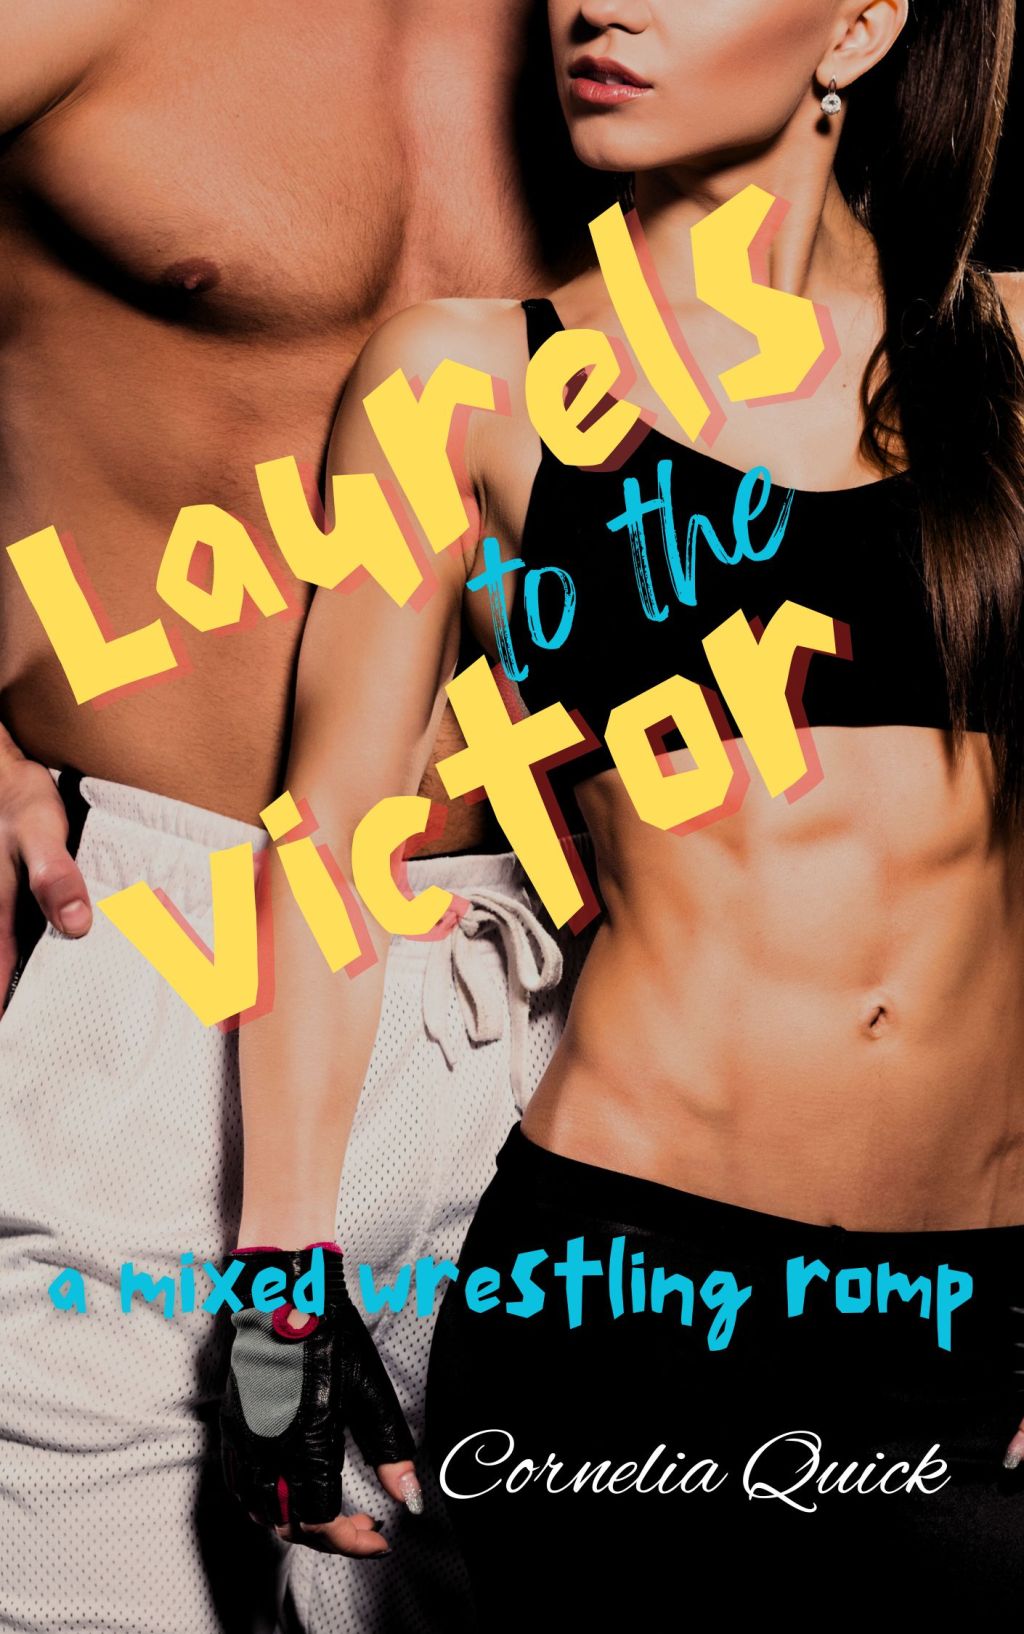 “Laurels to the Victor” now available on Kindle Unlimited!